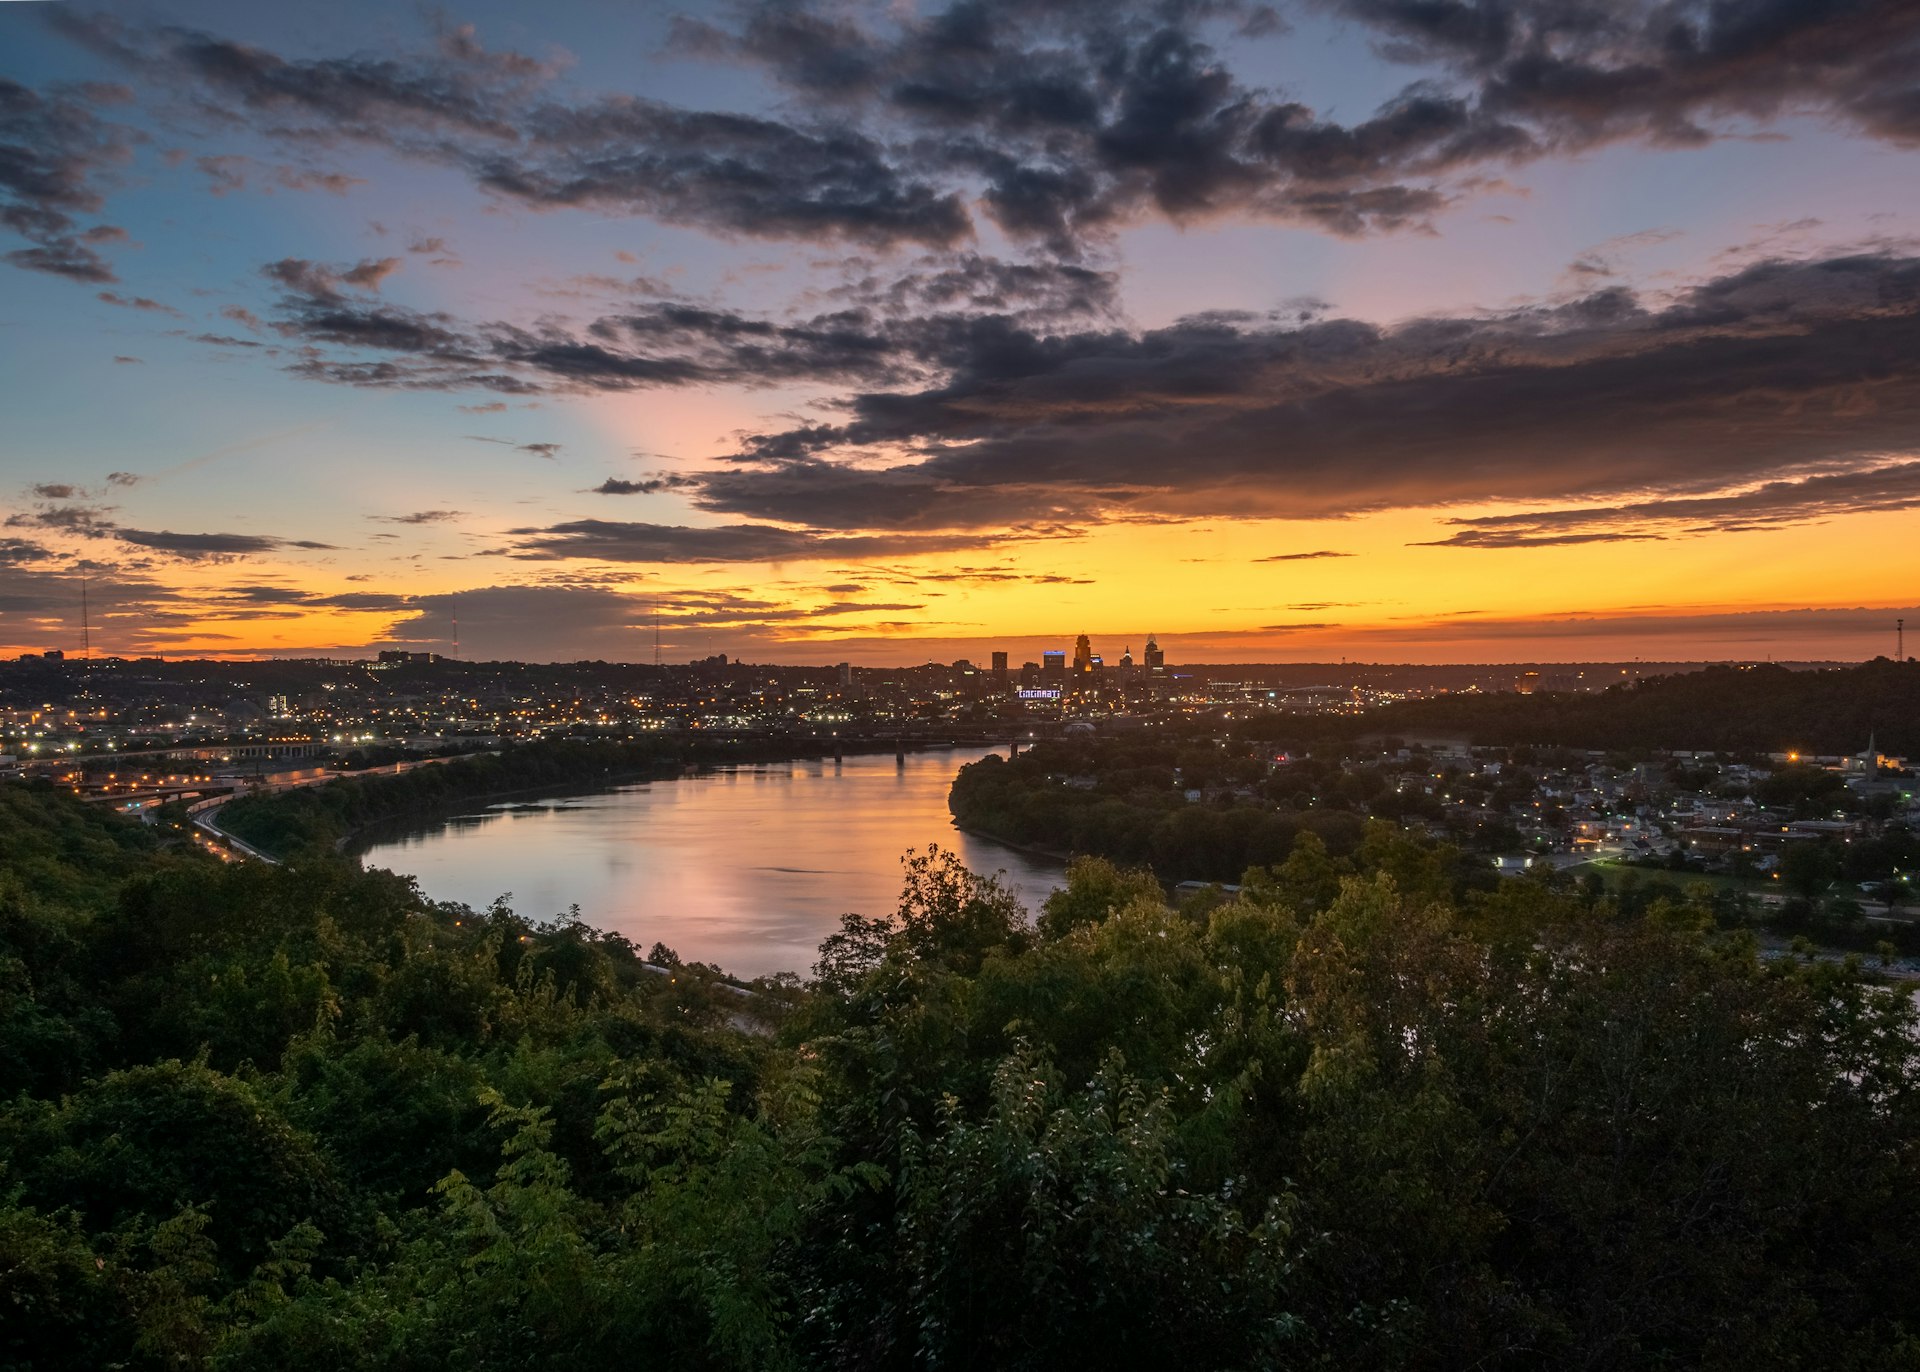 Picture-perfect views of the Cincinnati skyline and the Ohio River from Eden Park